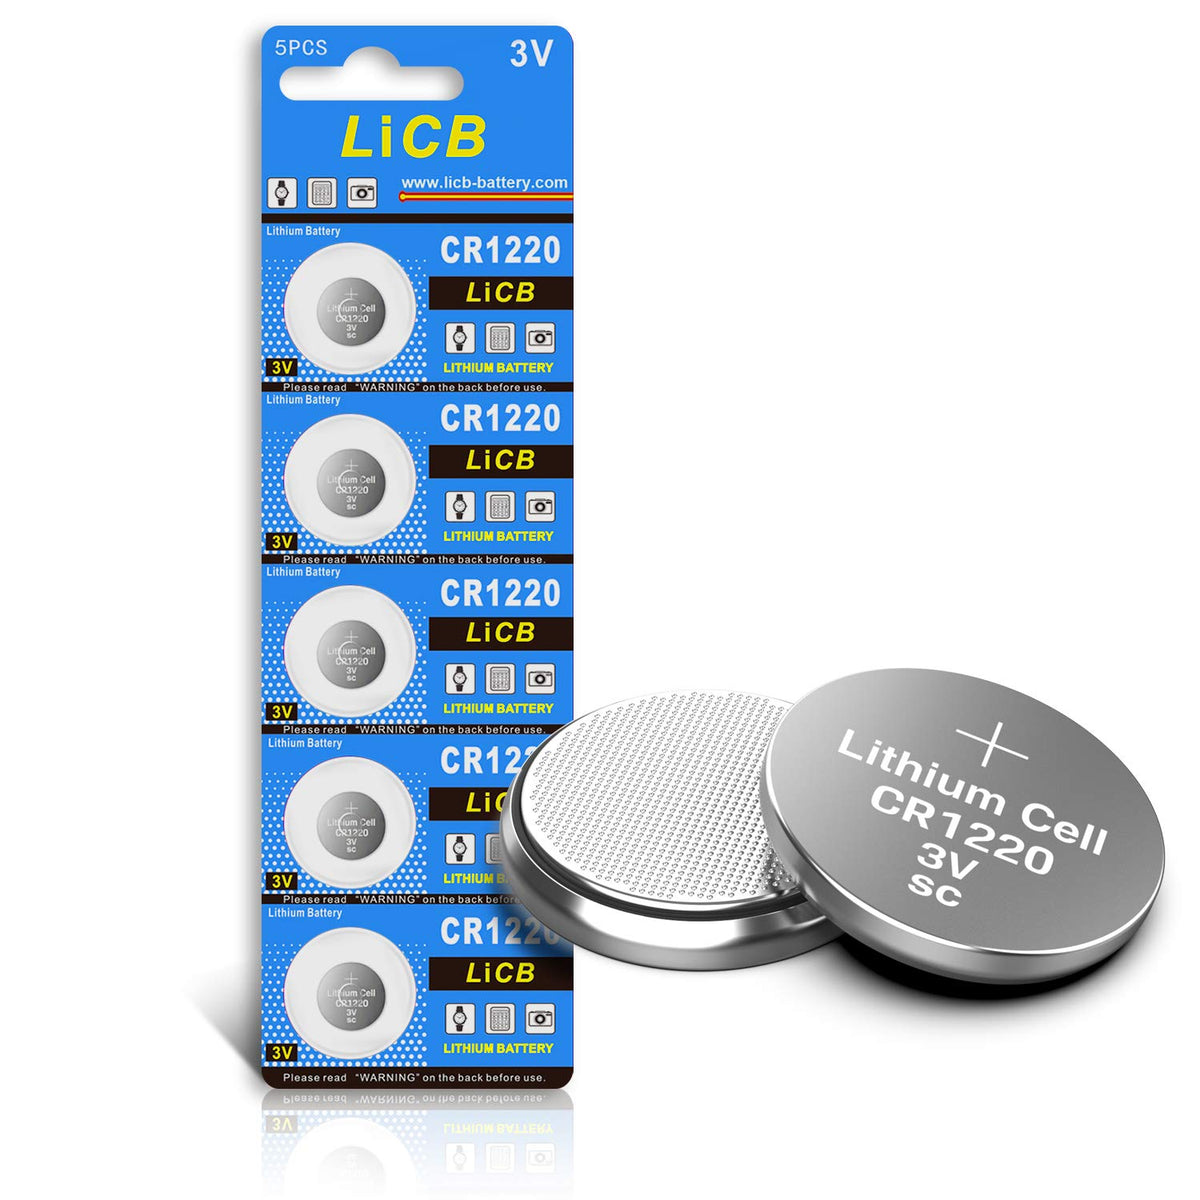 LiCB CR1220 Battery 3V Lithium 5PCS (CR 1220 / Batteries CR1220 / DL1220 / ECR1220) for watches,Remotes,LED lights,electronic devices,Toys,Car key,Scales.